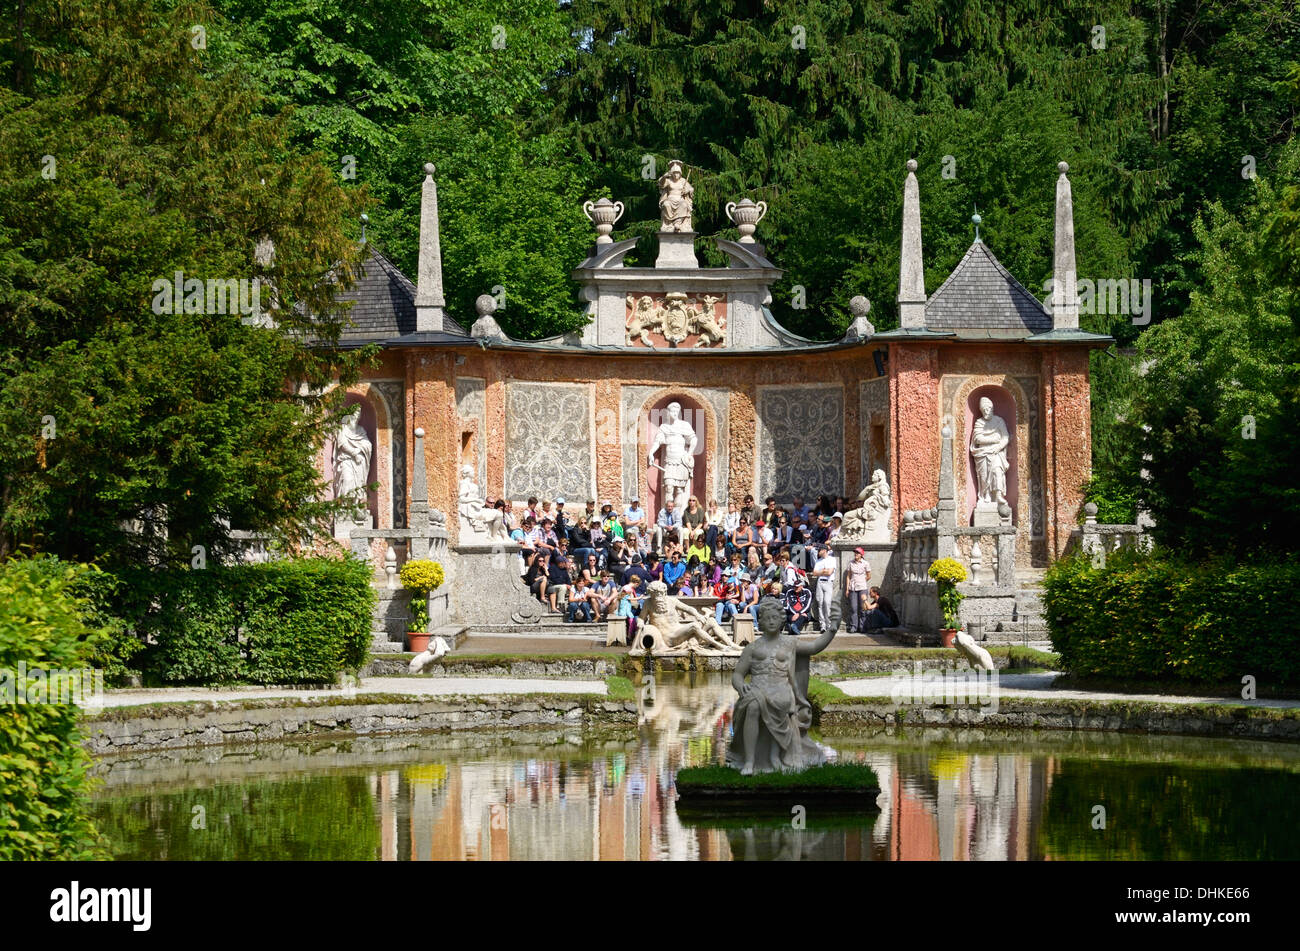 Theatre and water gardens in Hellbrunn Palace, Salzburg, Austria Stock Photo